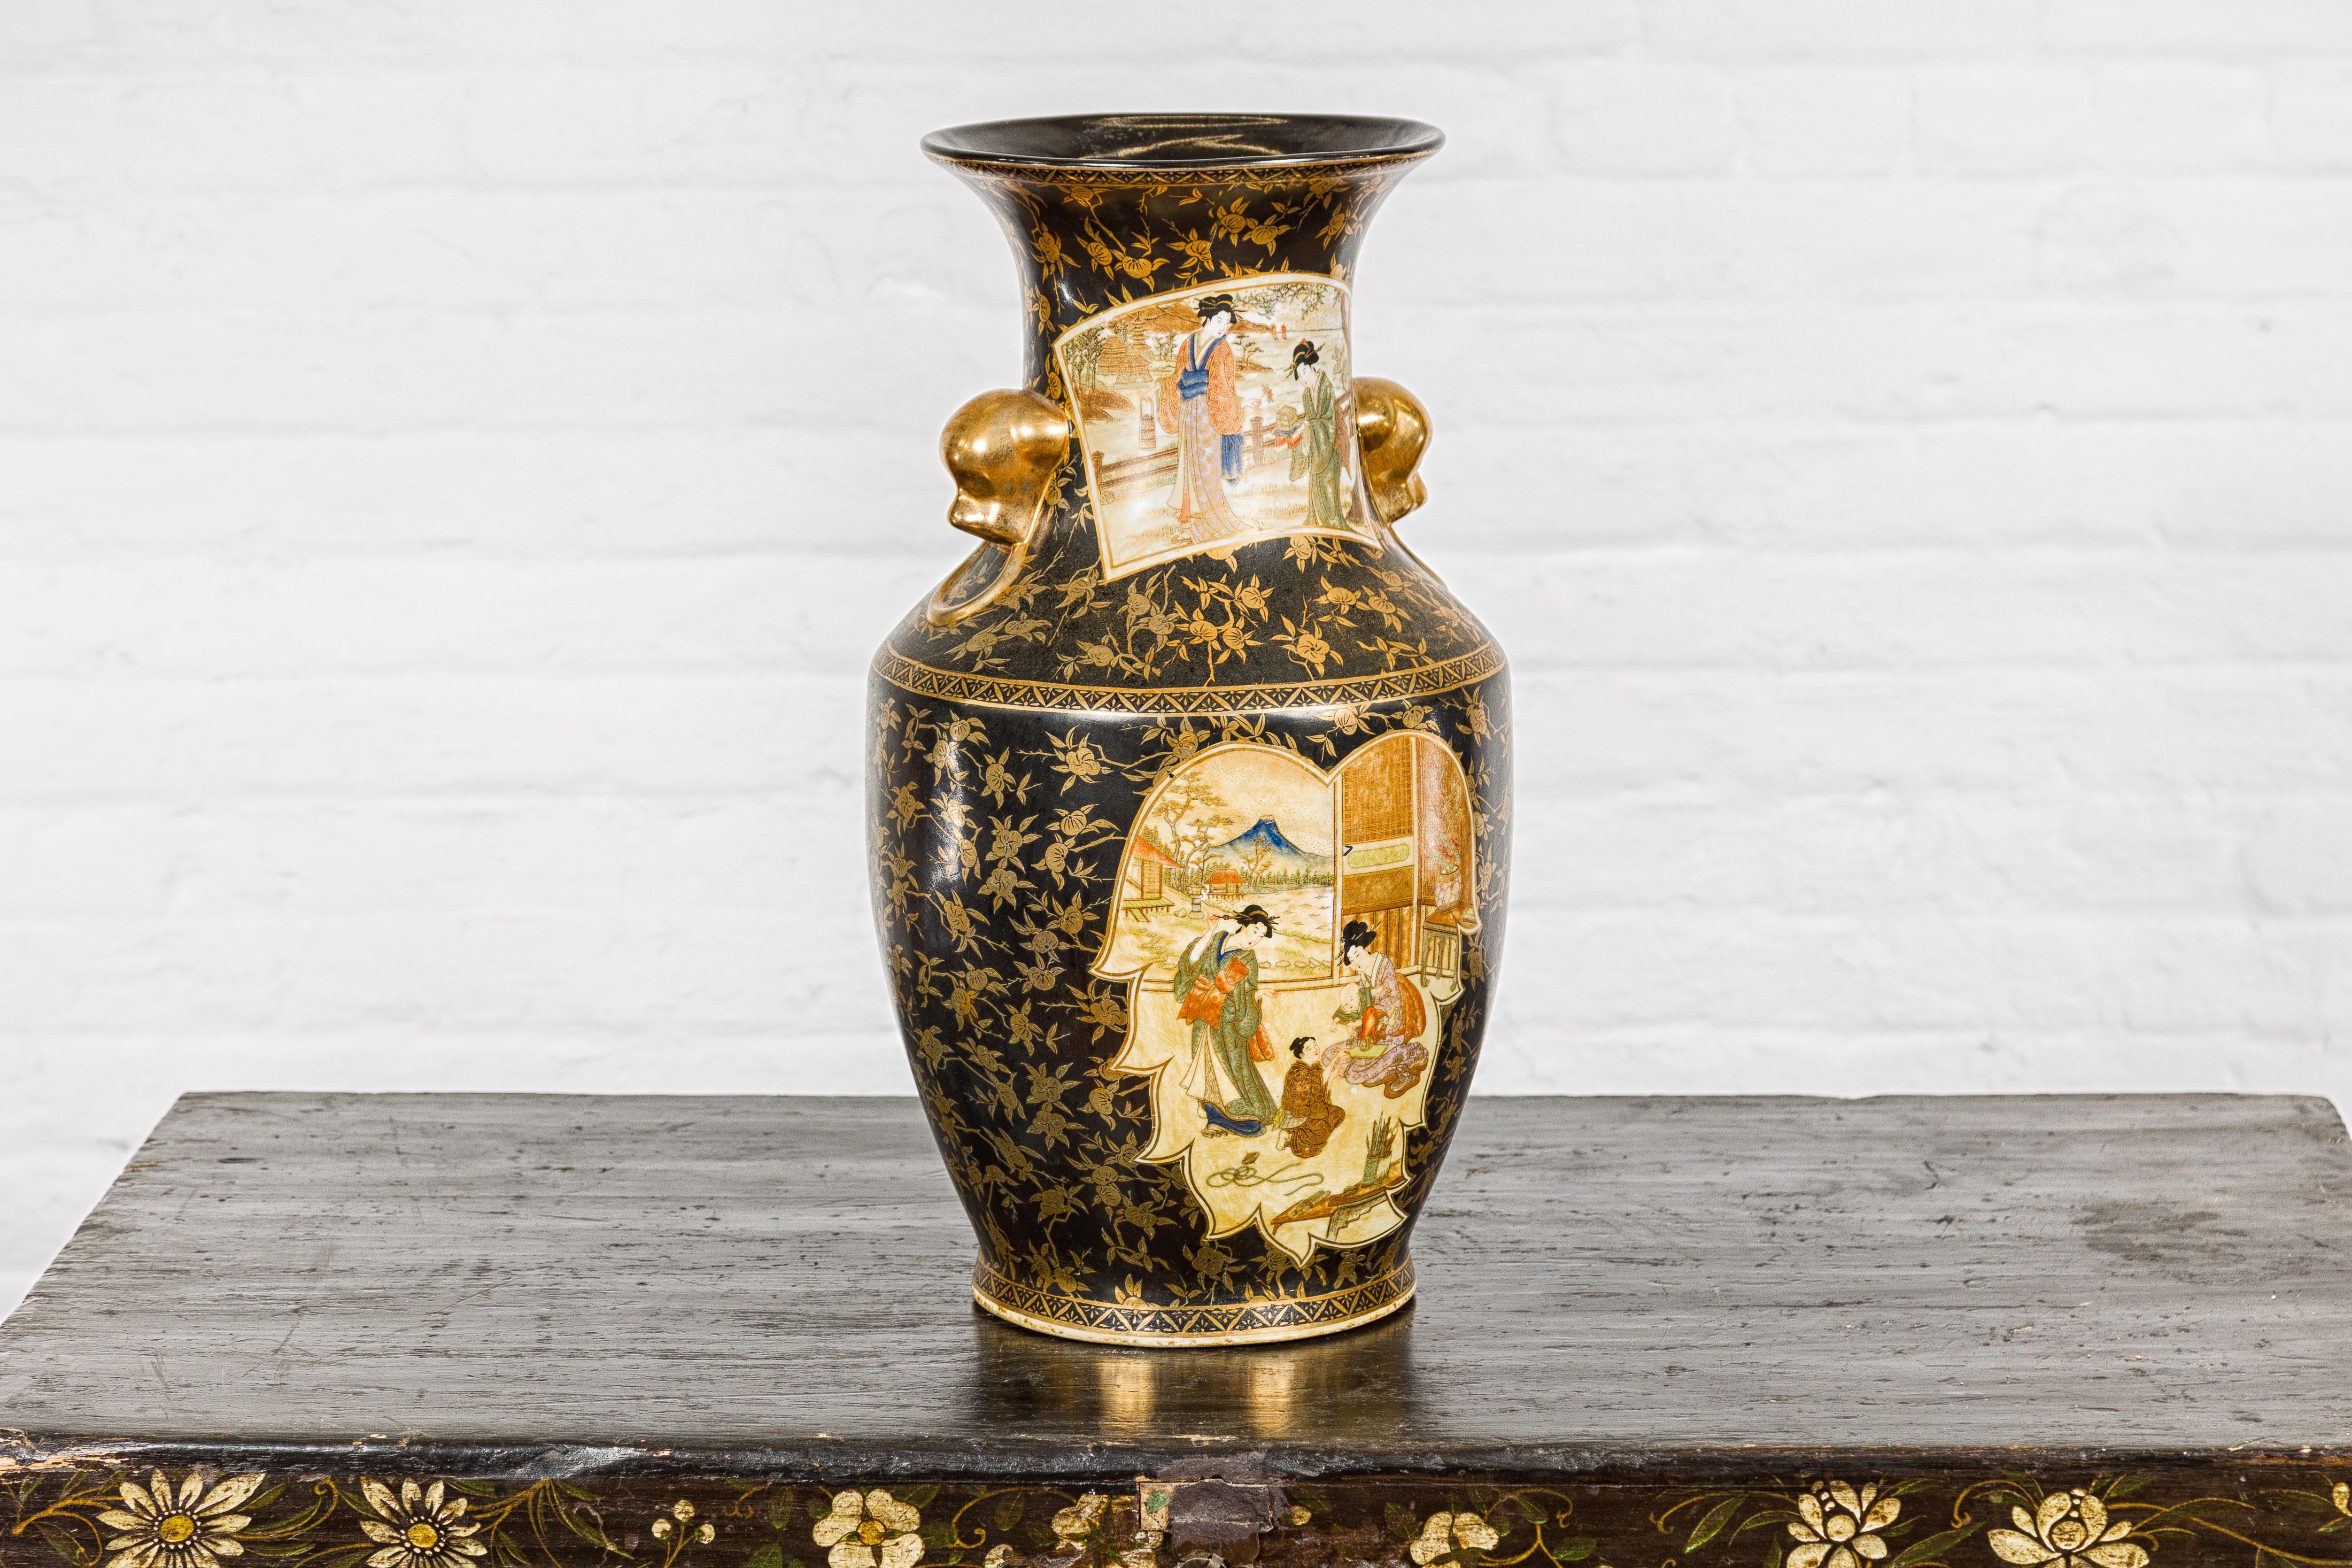 Japanese Inspired Black and Gold Vase with Family Scenes and Foo Dog Handles For Sale 2